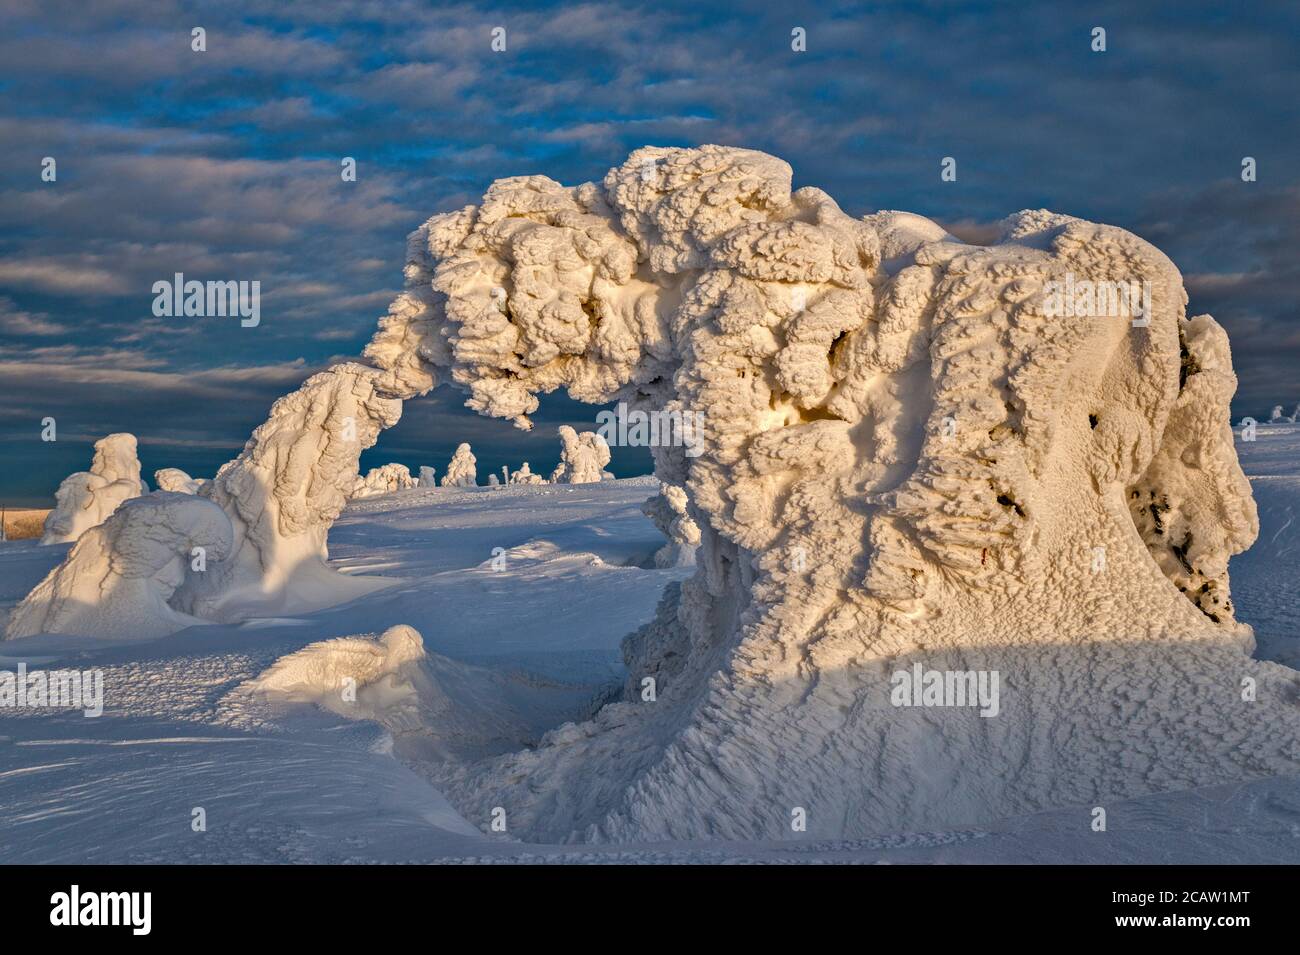 Dwarf mountain pines, ice and snow encased, at sunrise, below summit of Szrenica, Karkonosze National Park, at border of Poland and Czech Republic Stock Photo